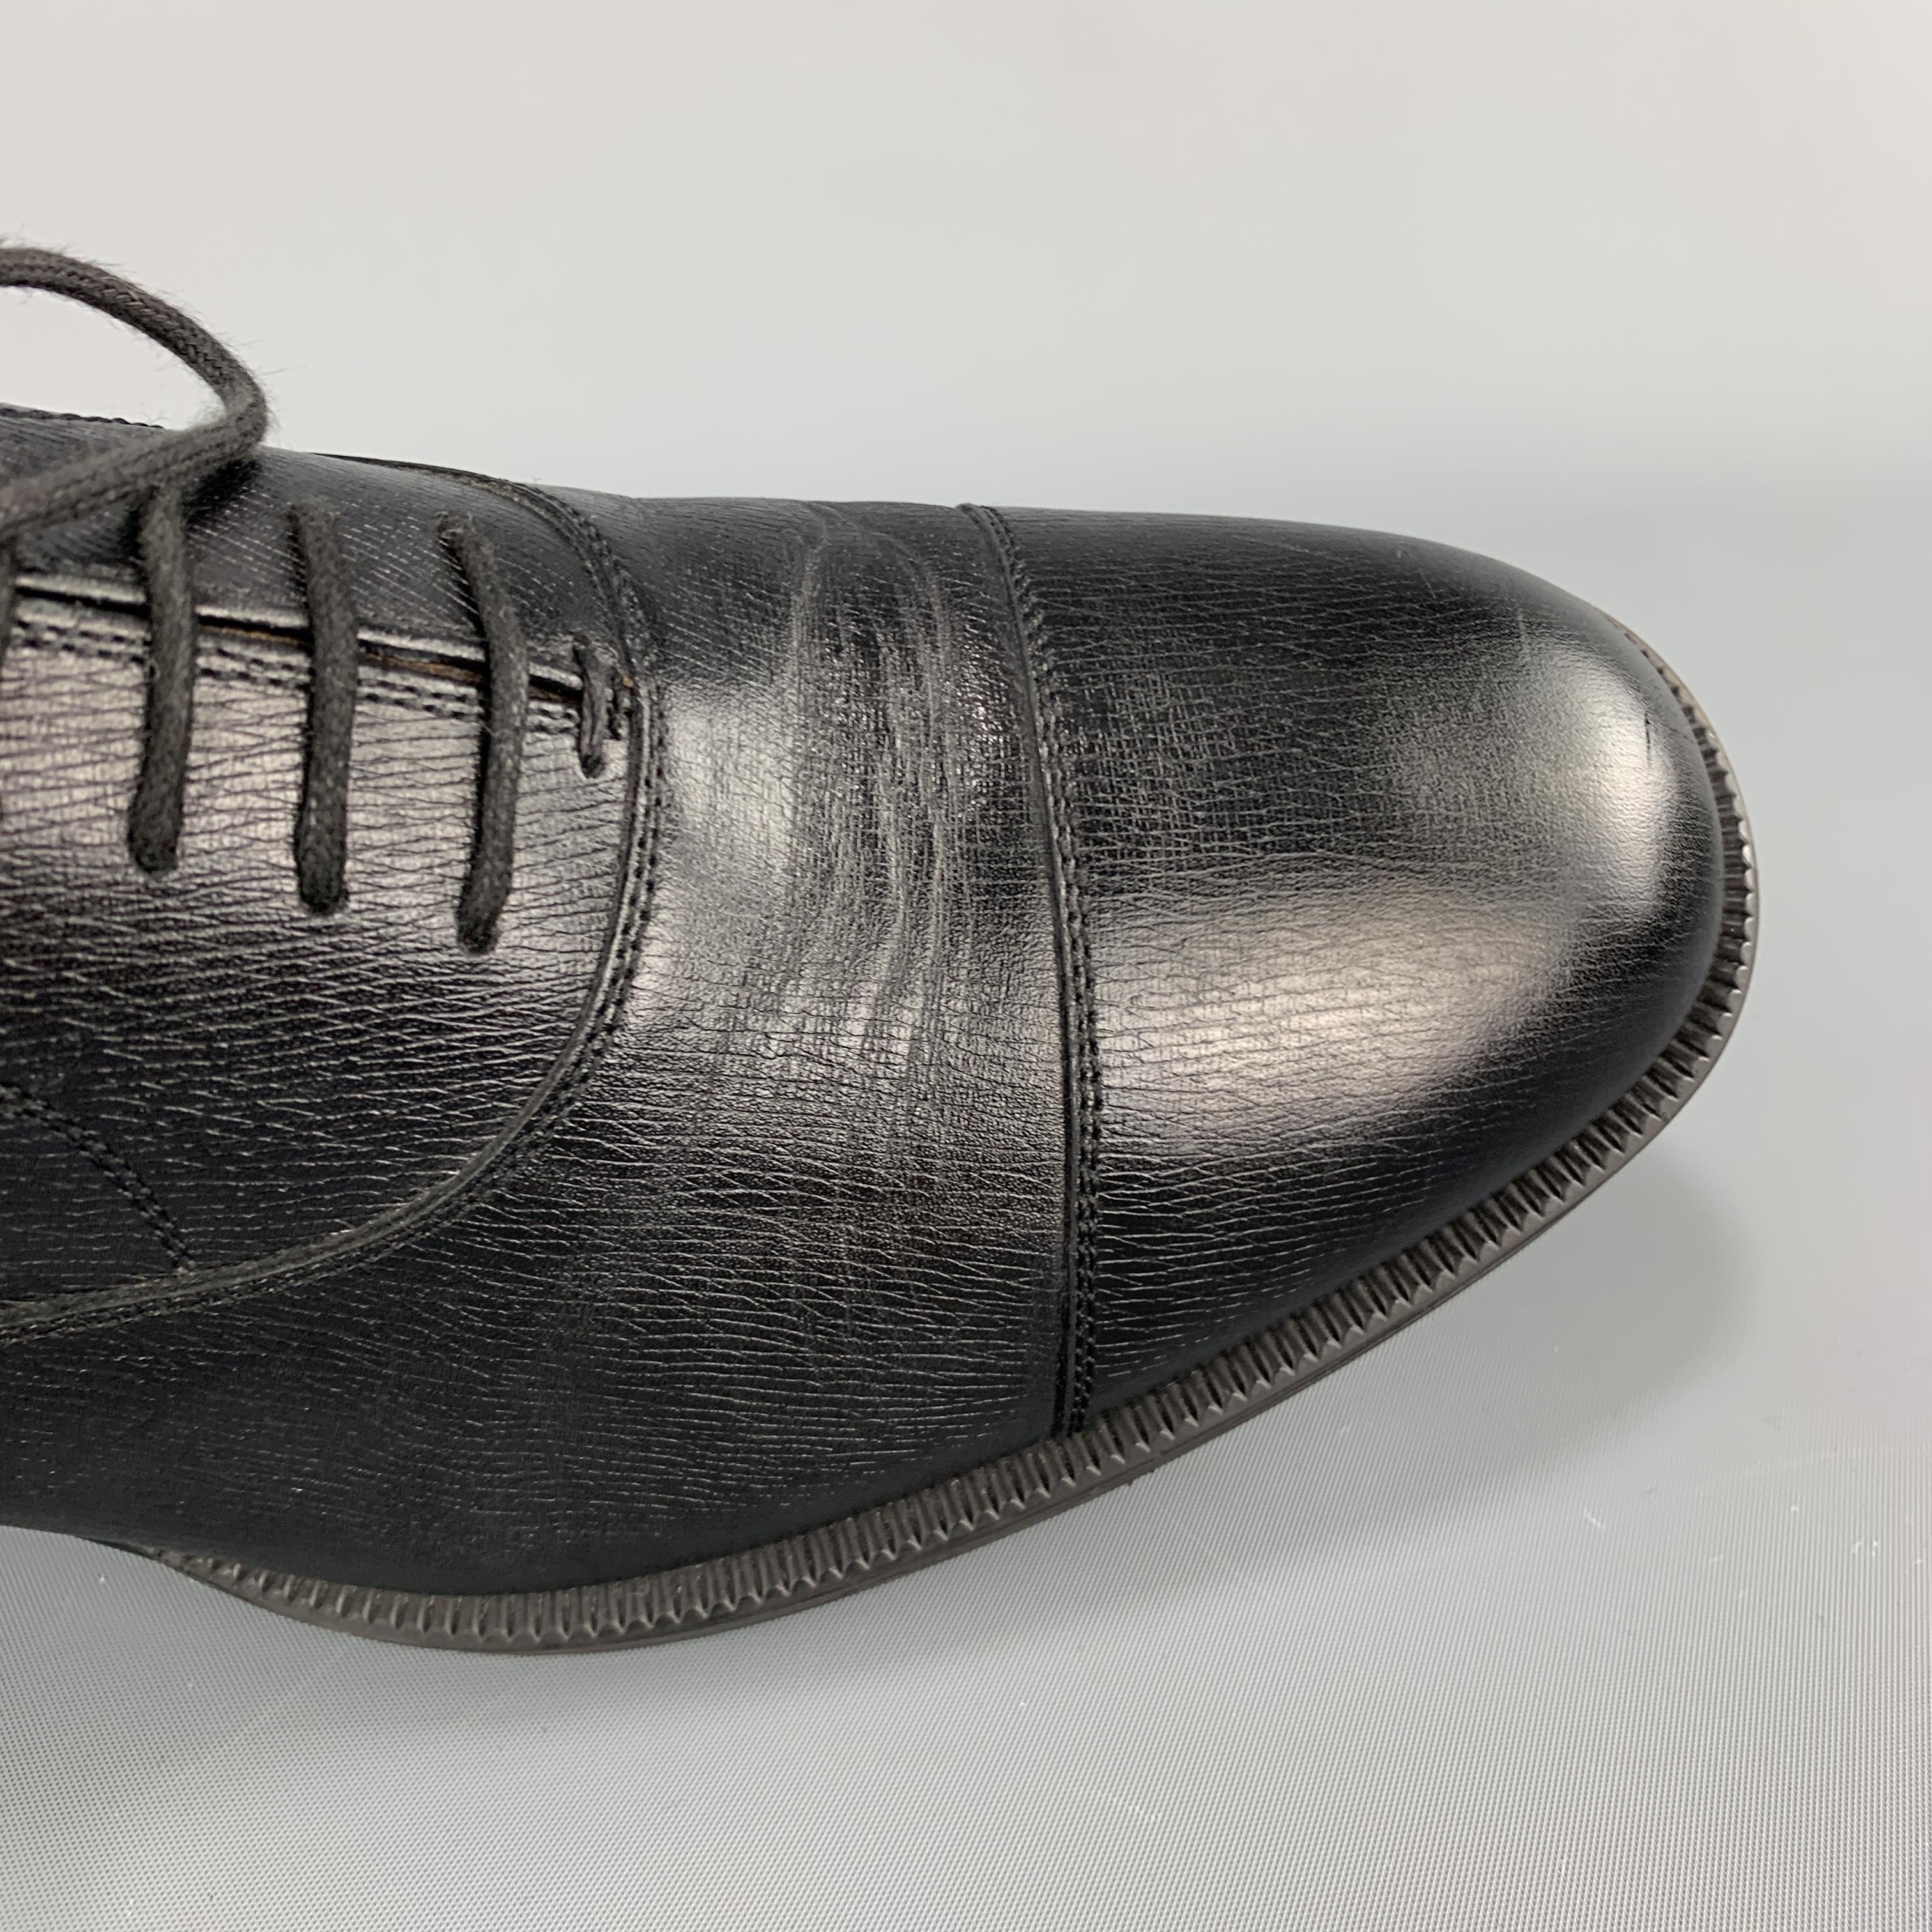 GUCCI dress shoes come in black textured leather with a cap toe and rubber sole with silver tone logo plat heel. Made in Italy.

Excellent Pre-Owned Condition.
Marked: UK 9

Outsole: 11.5 x 4 in.